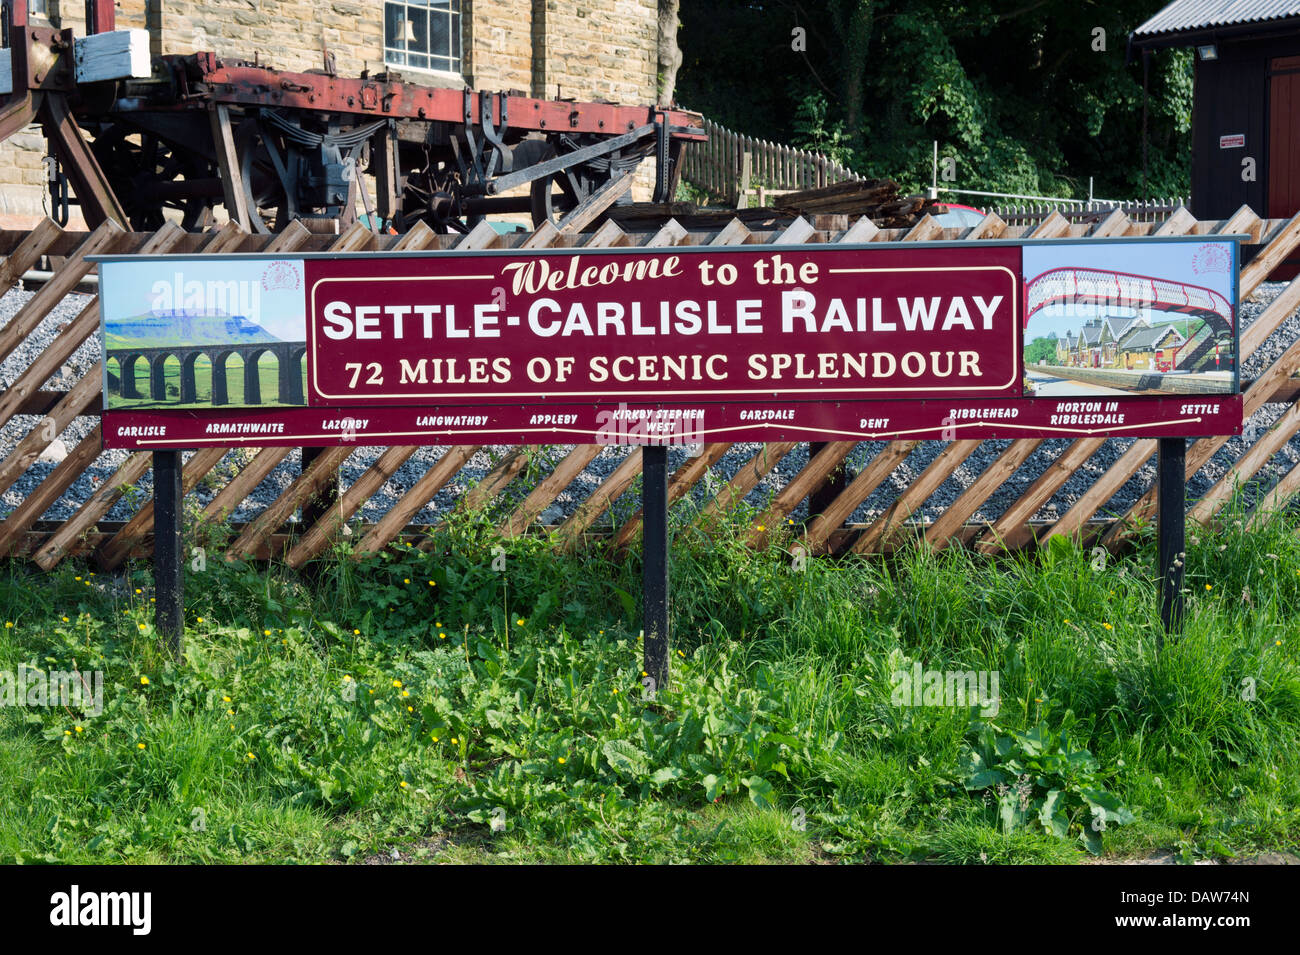 Settle station yard with sign board for the Settle to Carlisle railway, Settle, North Yorkshire, UK Stock Photo